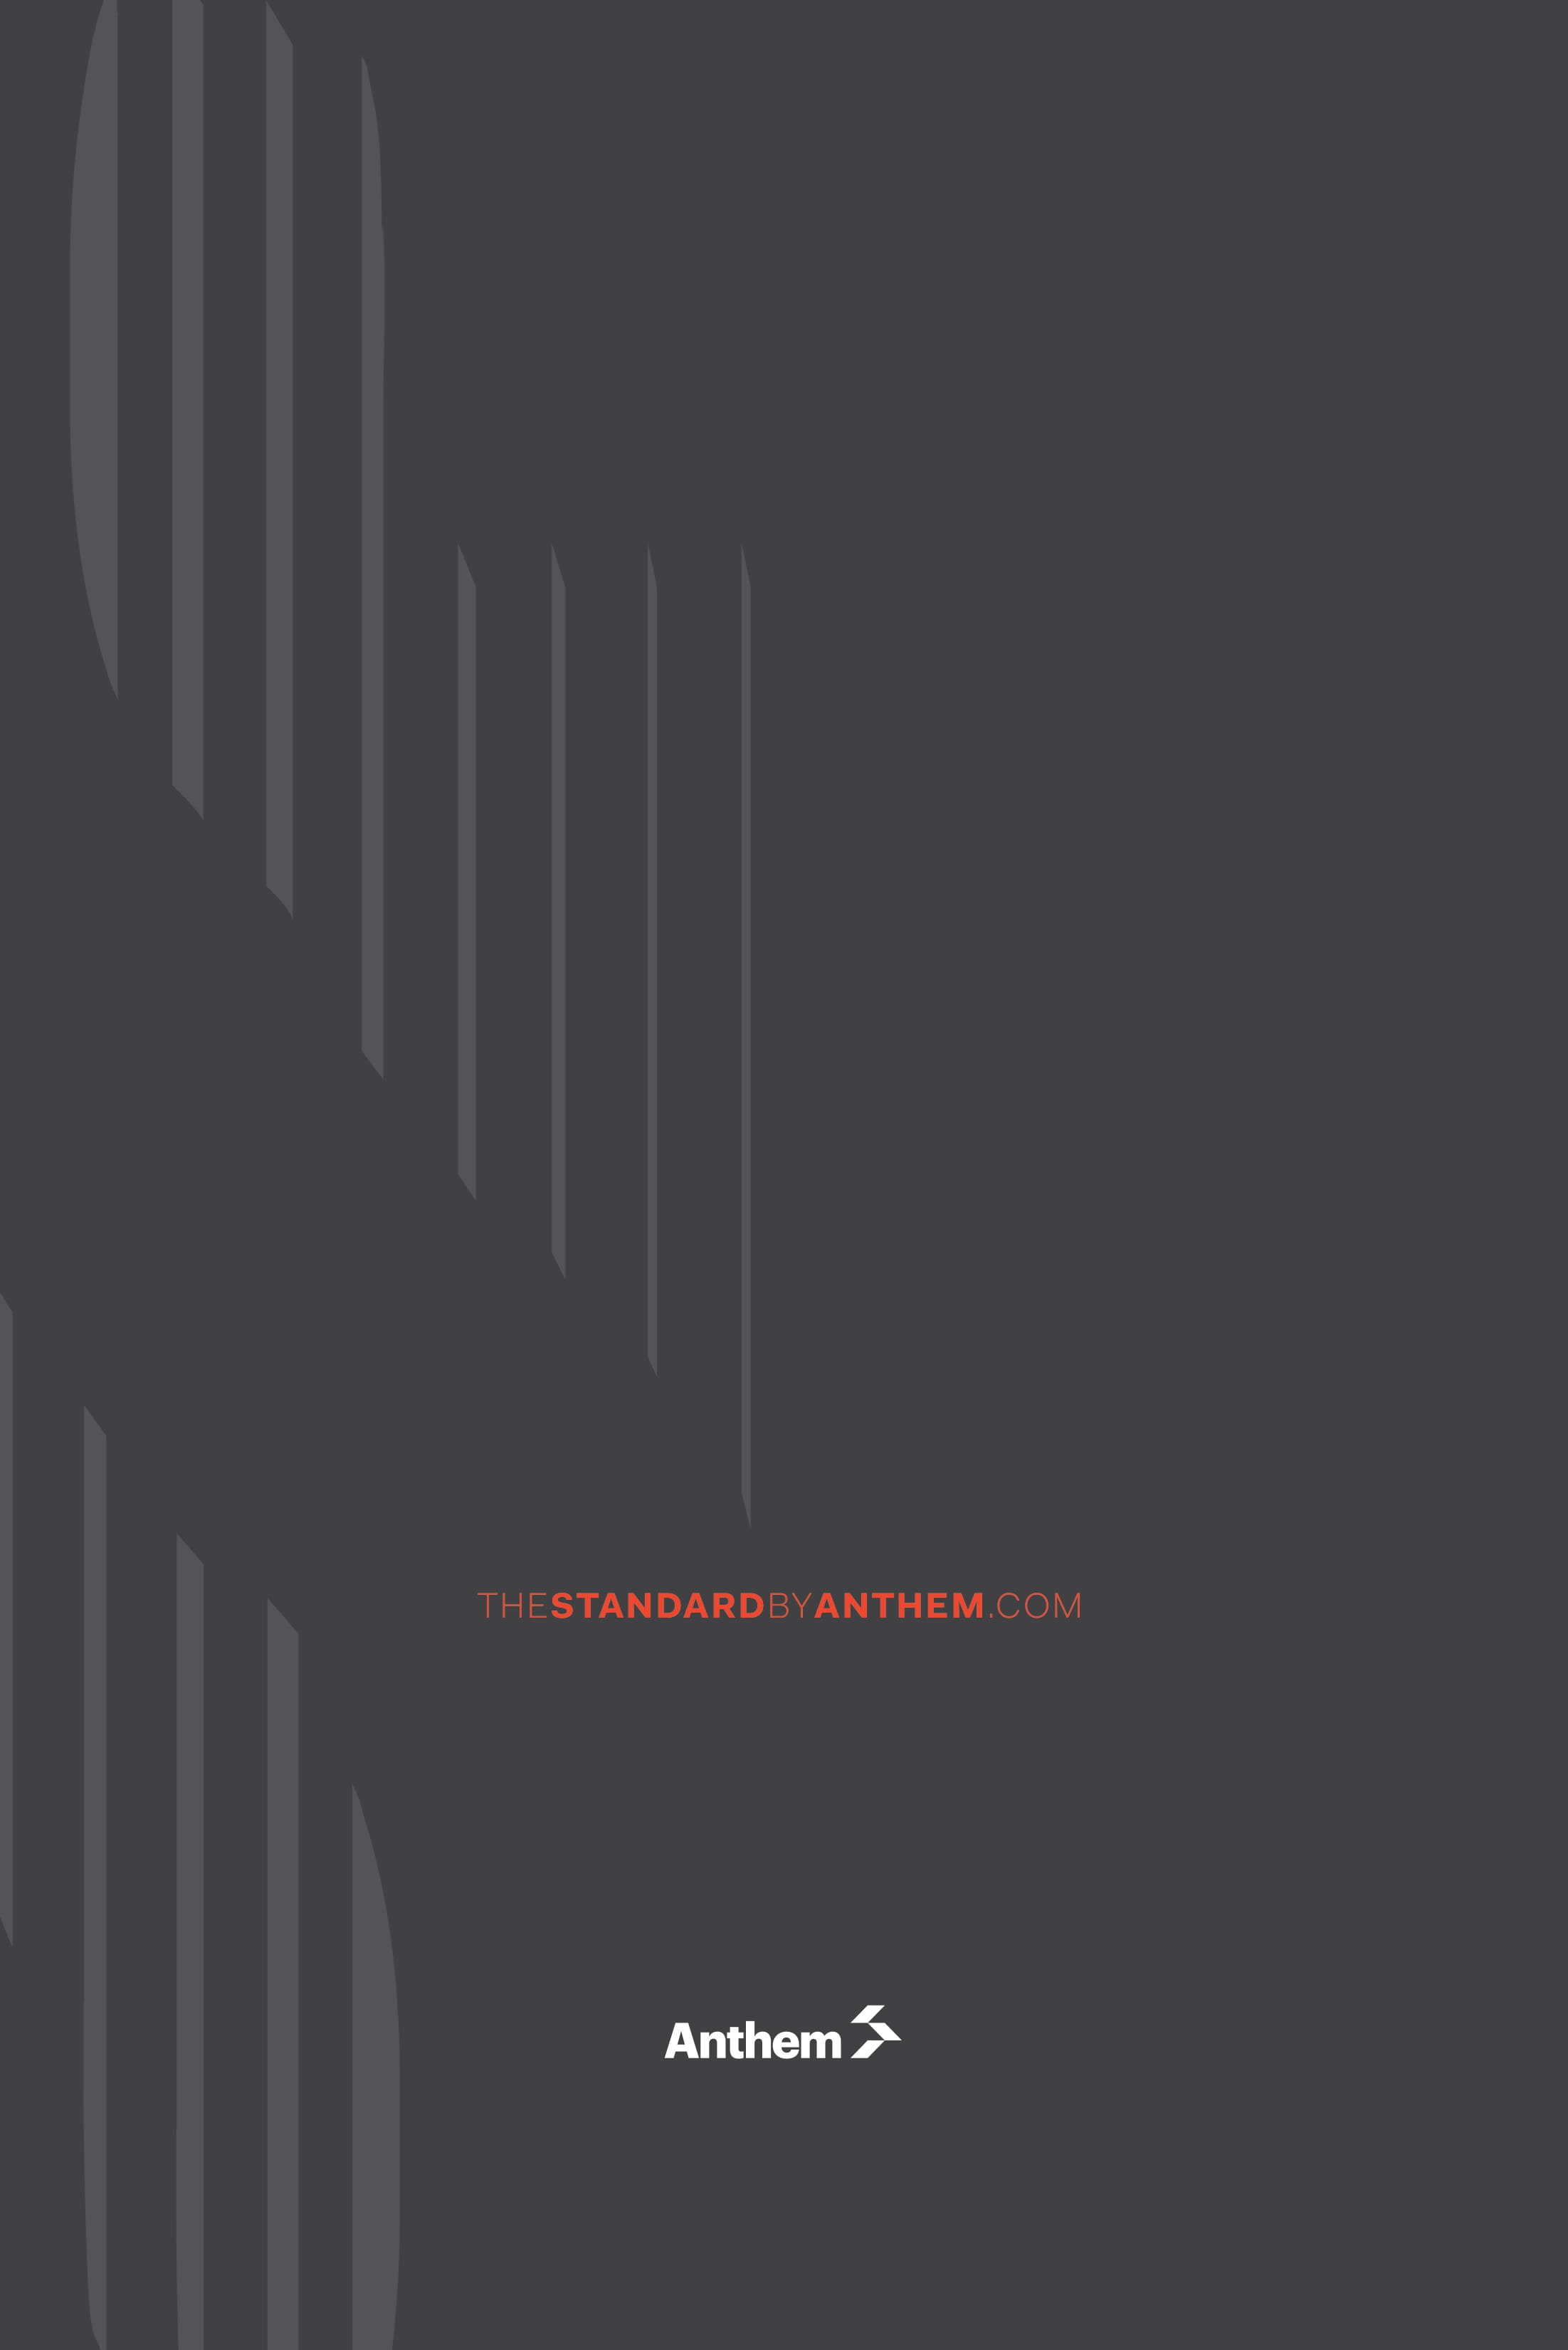 The Standard by Anthem Advance Preview Package Draft watermark 29